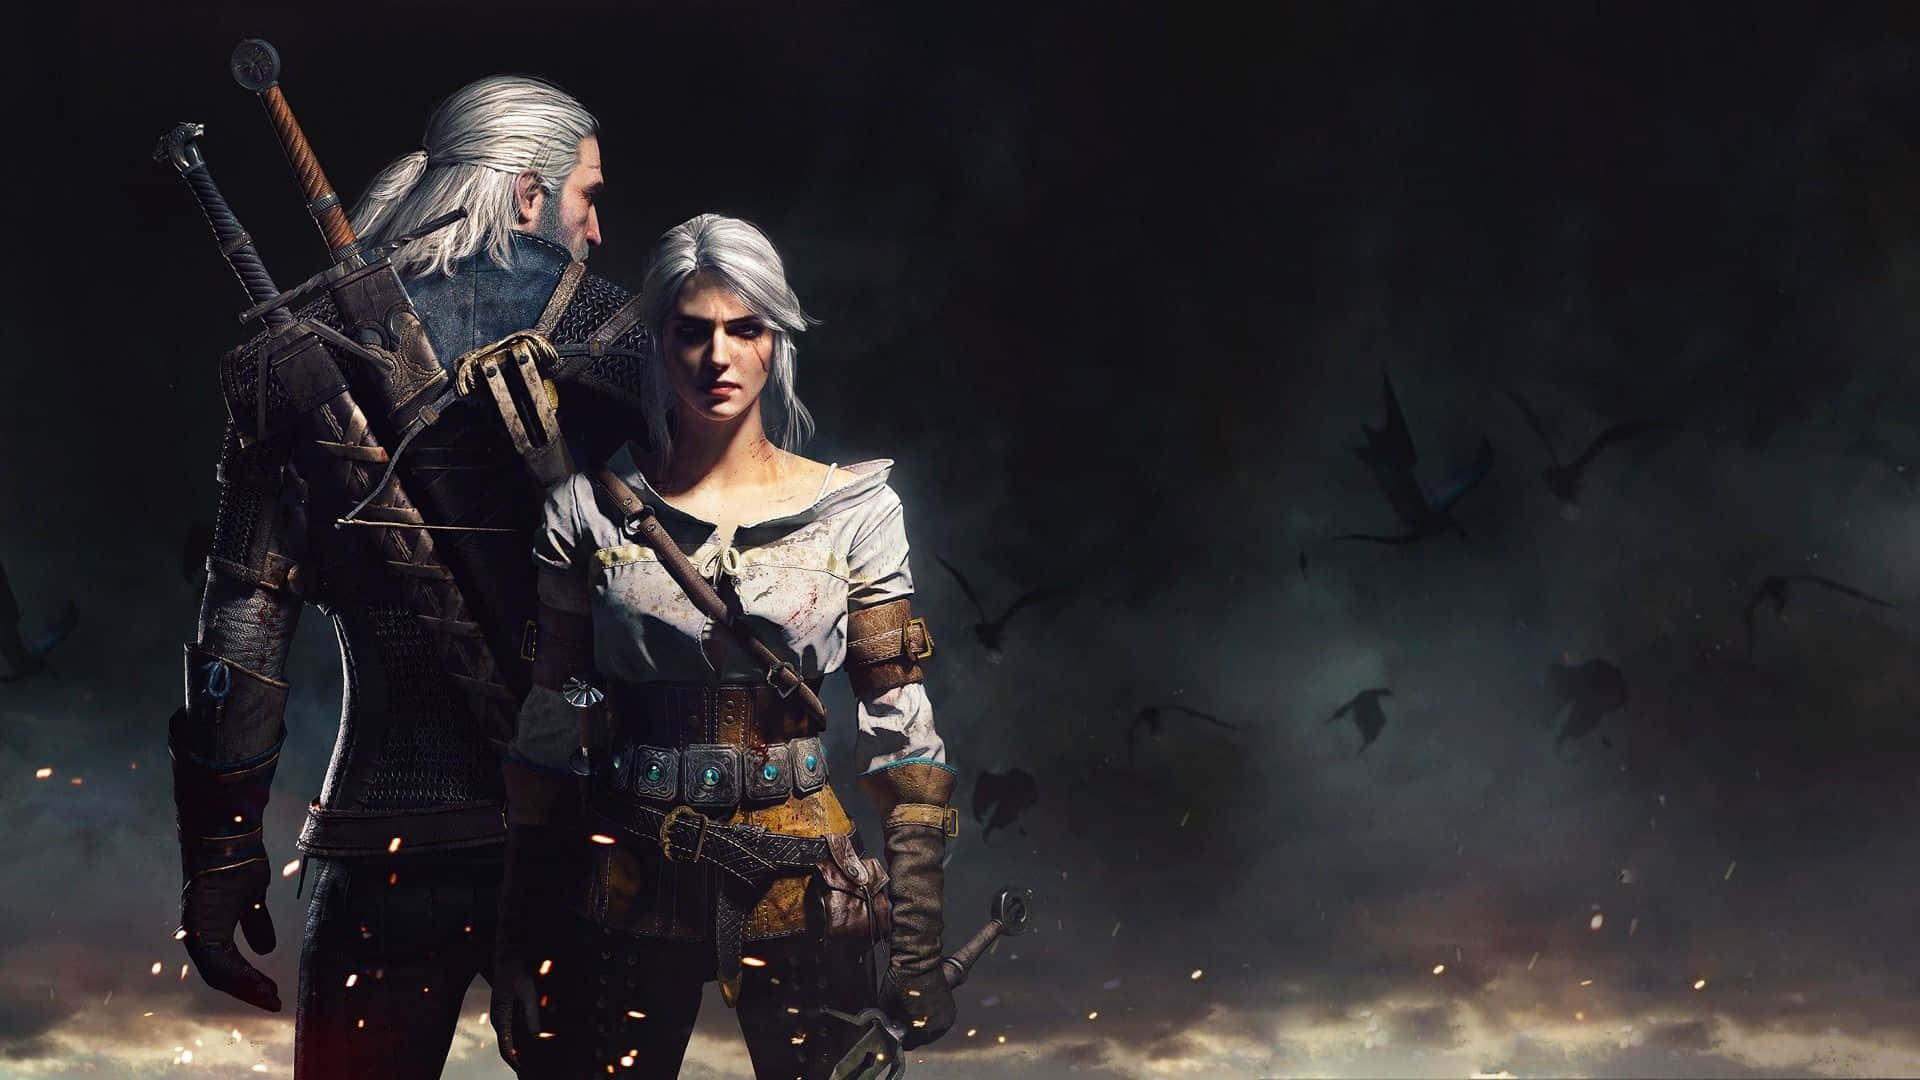 Prepare to embark on a quest by customizing your Witcher 3 Desktop Wallpaper